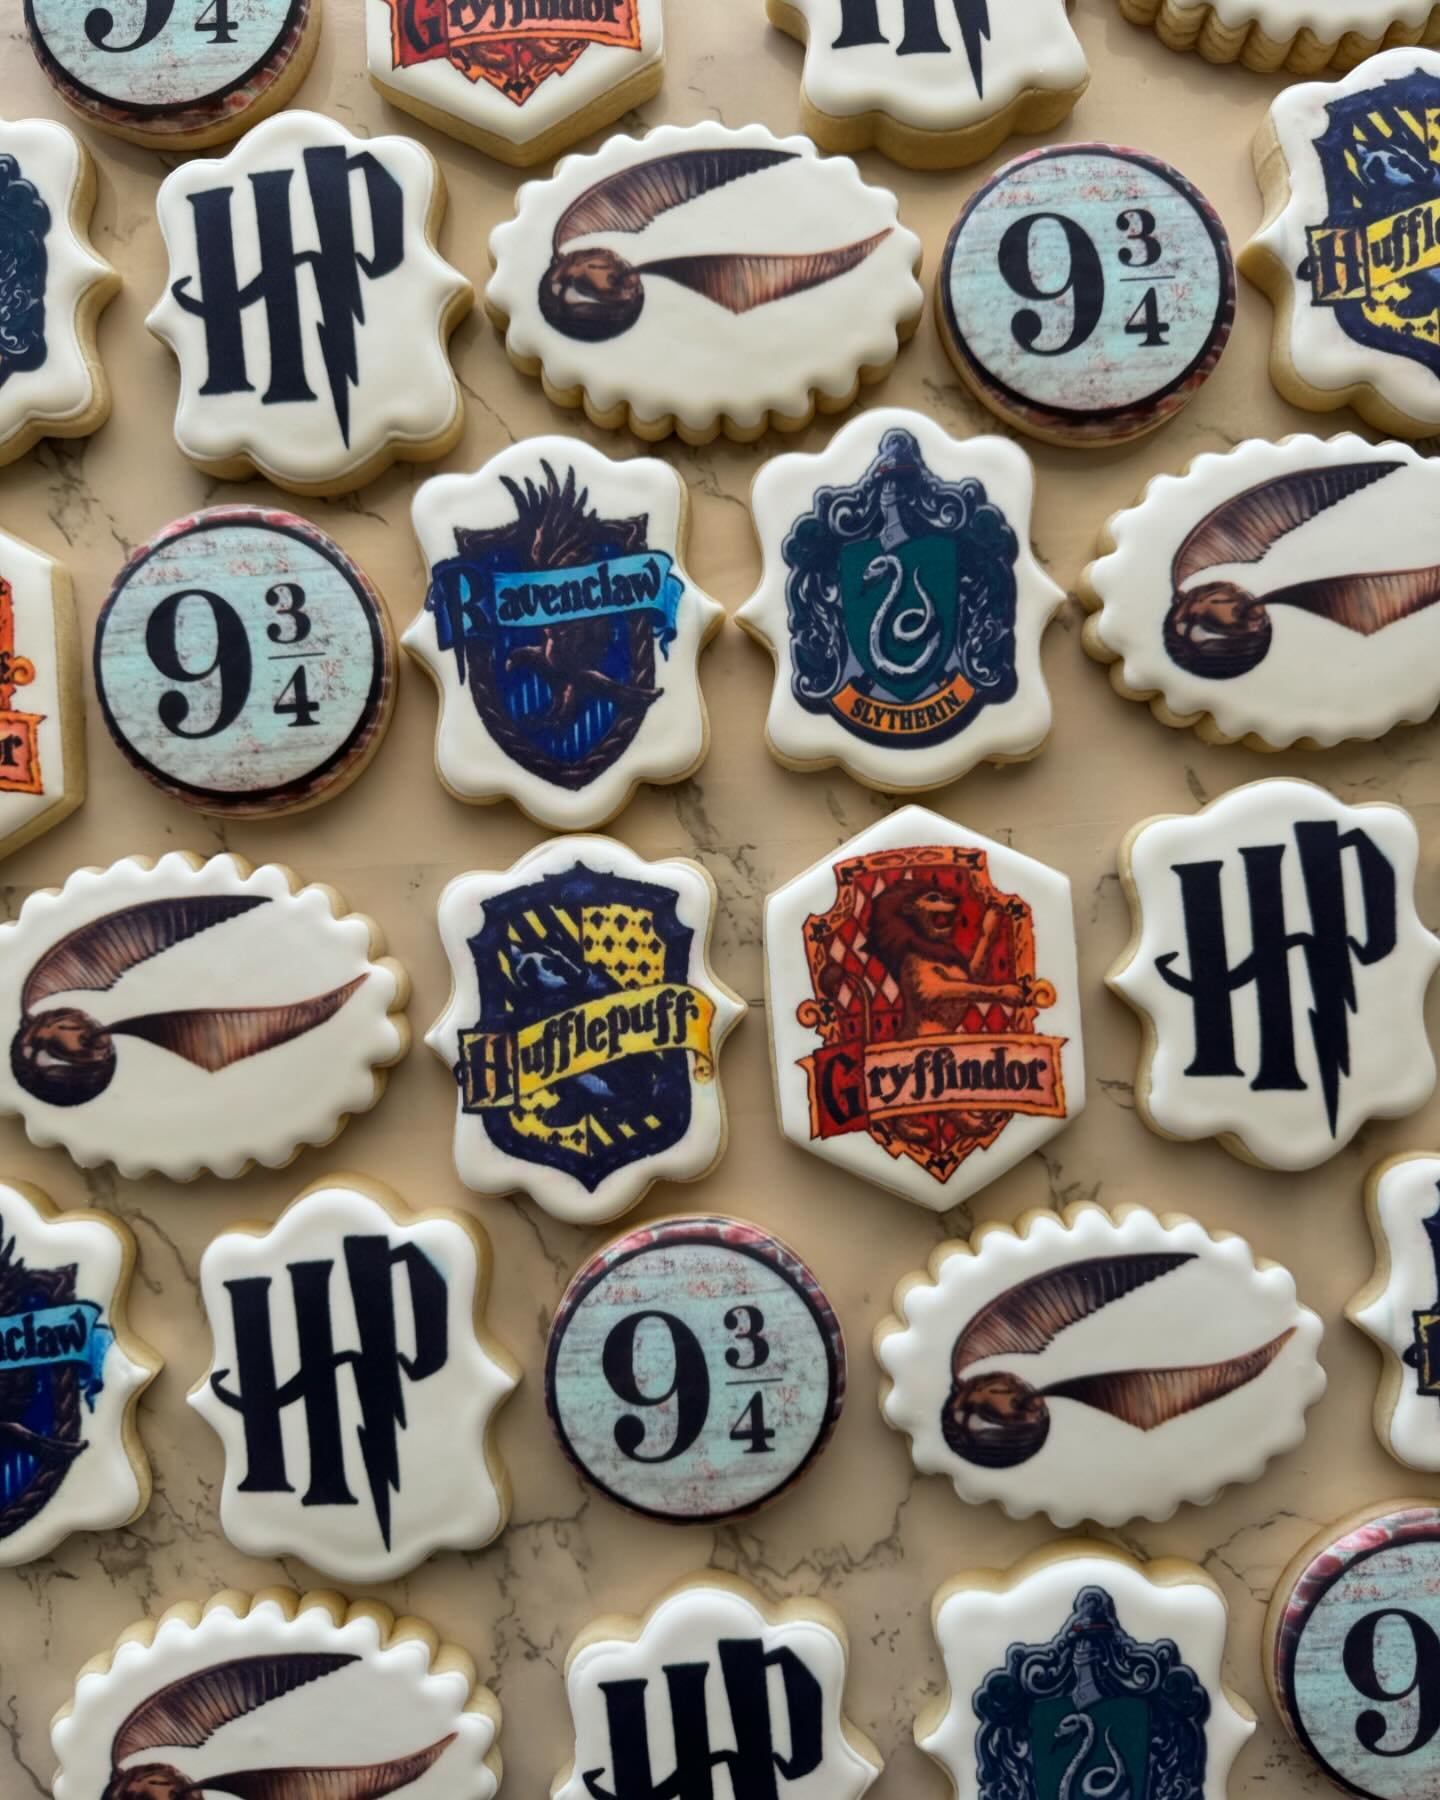 It&rsquo;s teacher appreciation week!! These cookies were for all the Jamaica Elementary teachers. Thank you @jamaicacrocsptso for providing them with delicious cookies 🤤
.
.
.
#cookies #sugarcookkes #harrypotter #HP #teacherappreciationweek #teache